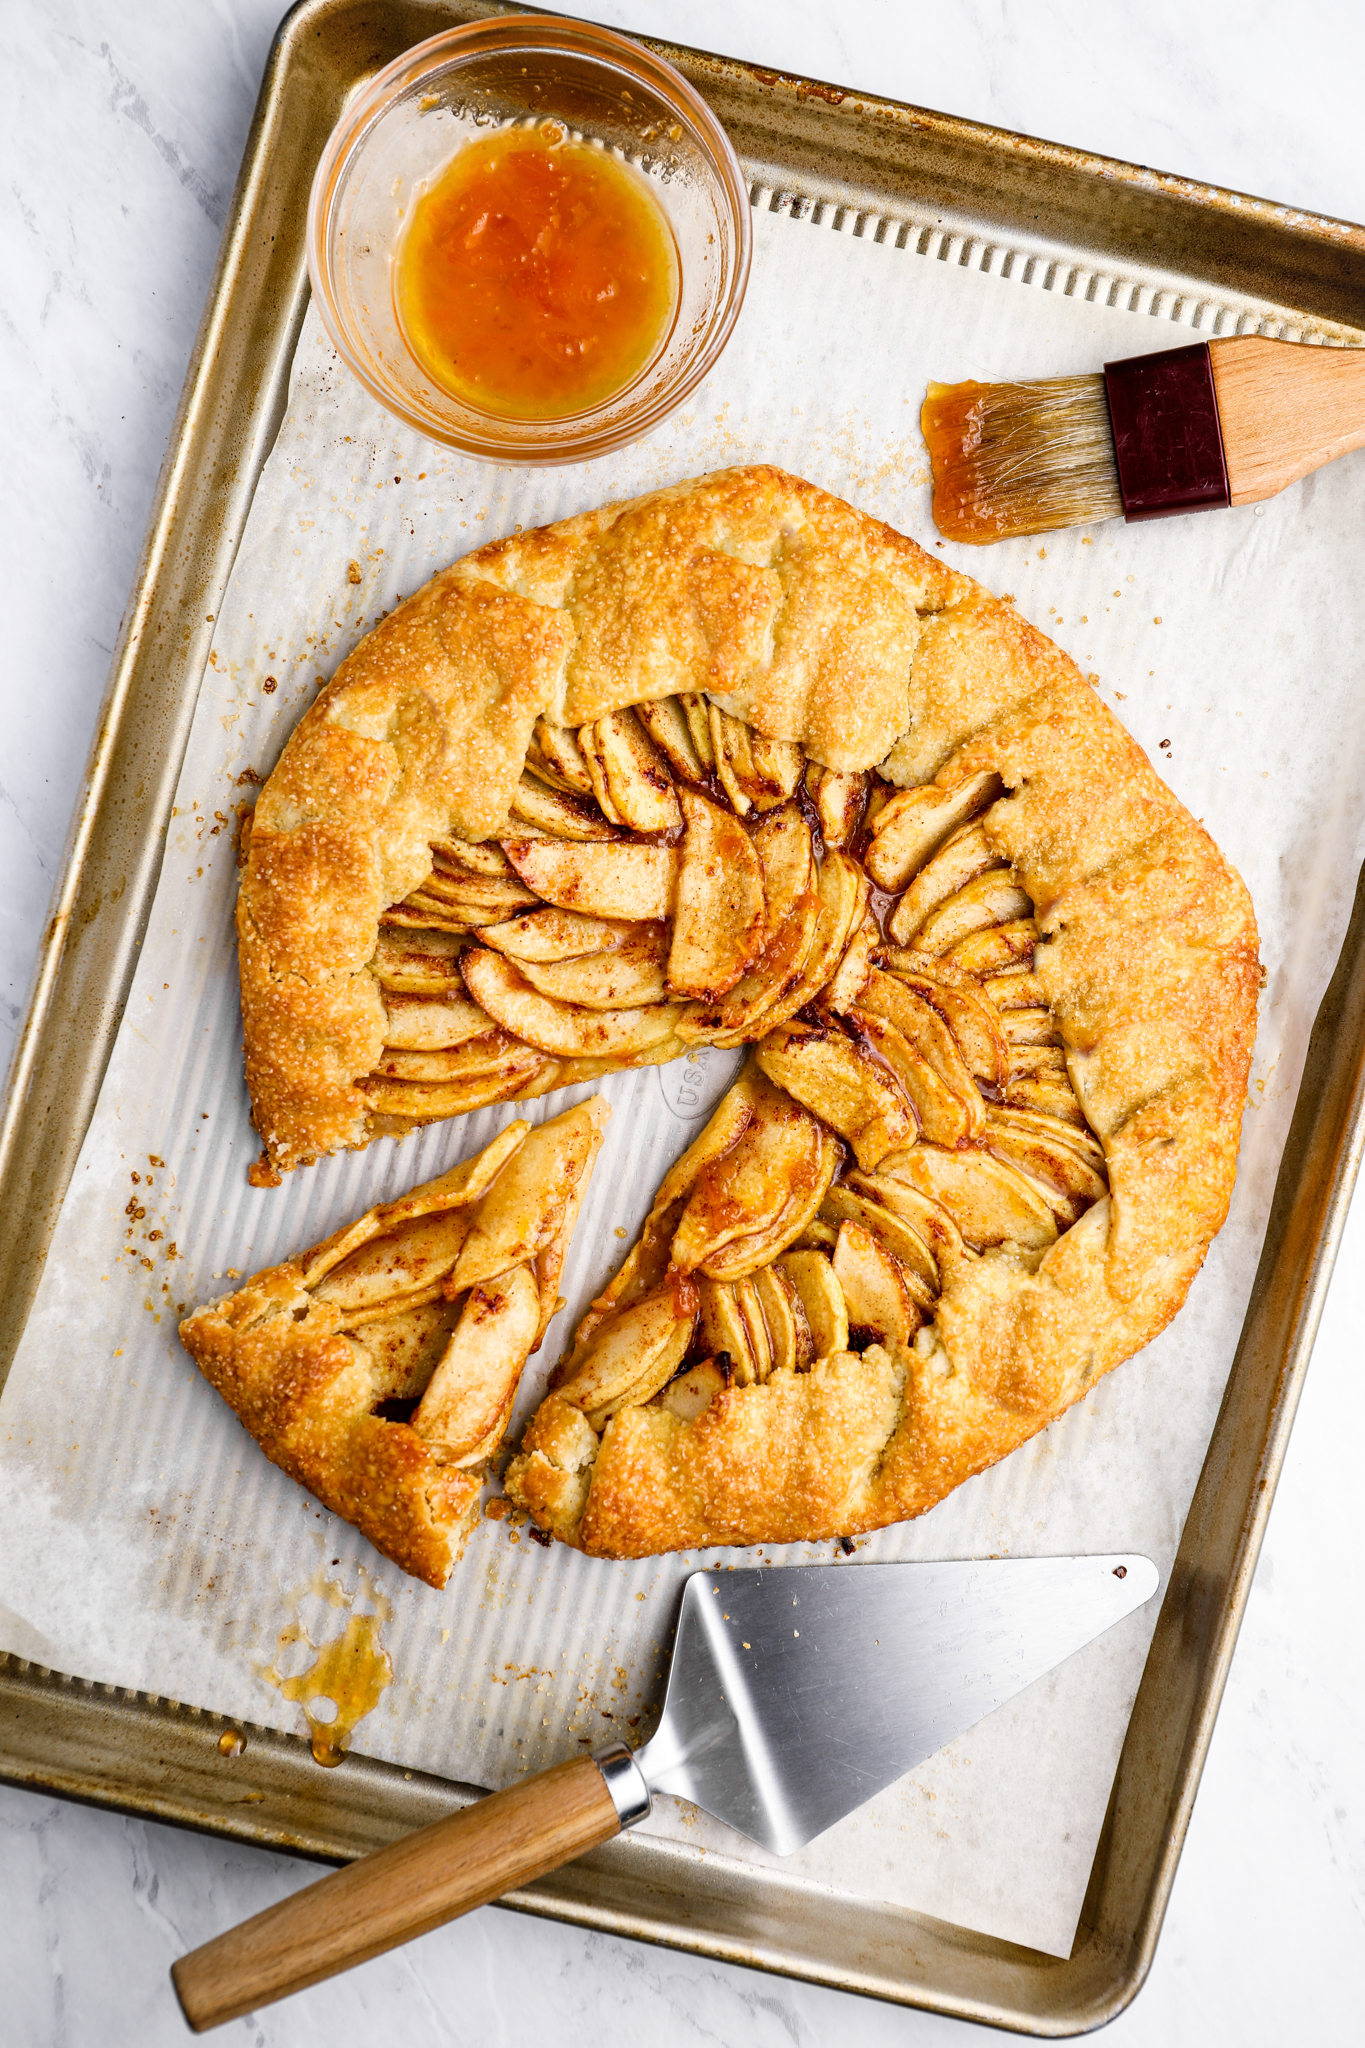 Rustic French Apple Tart pic